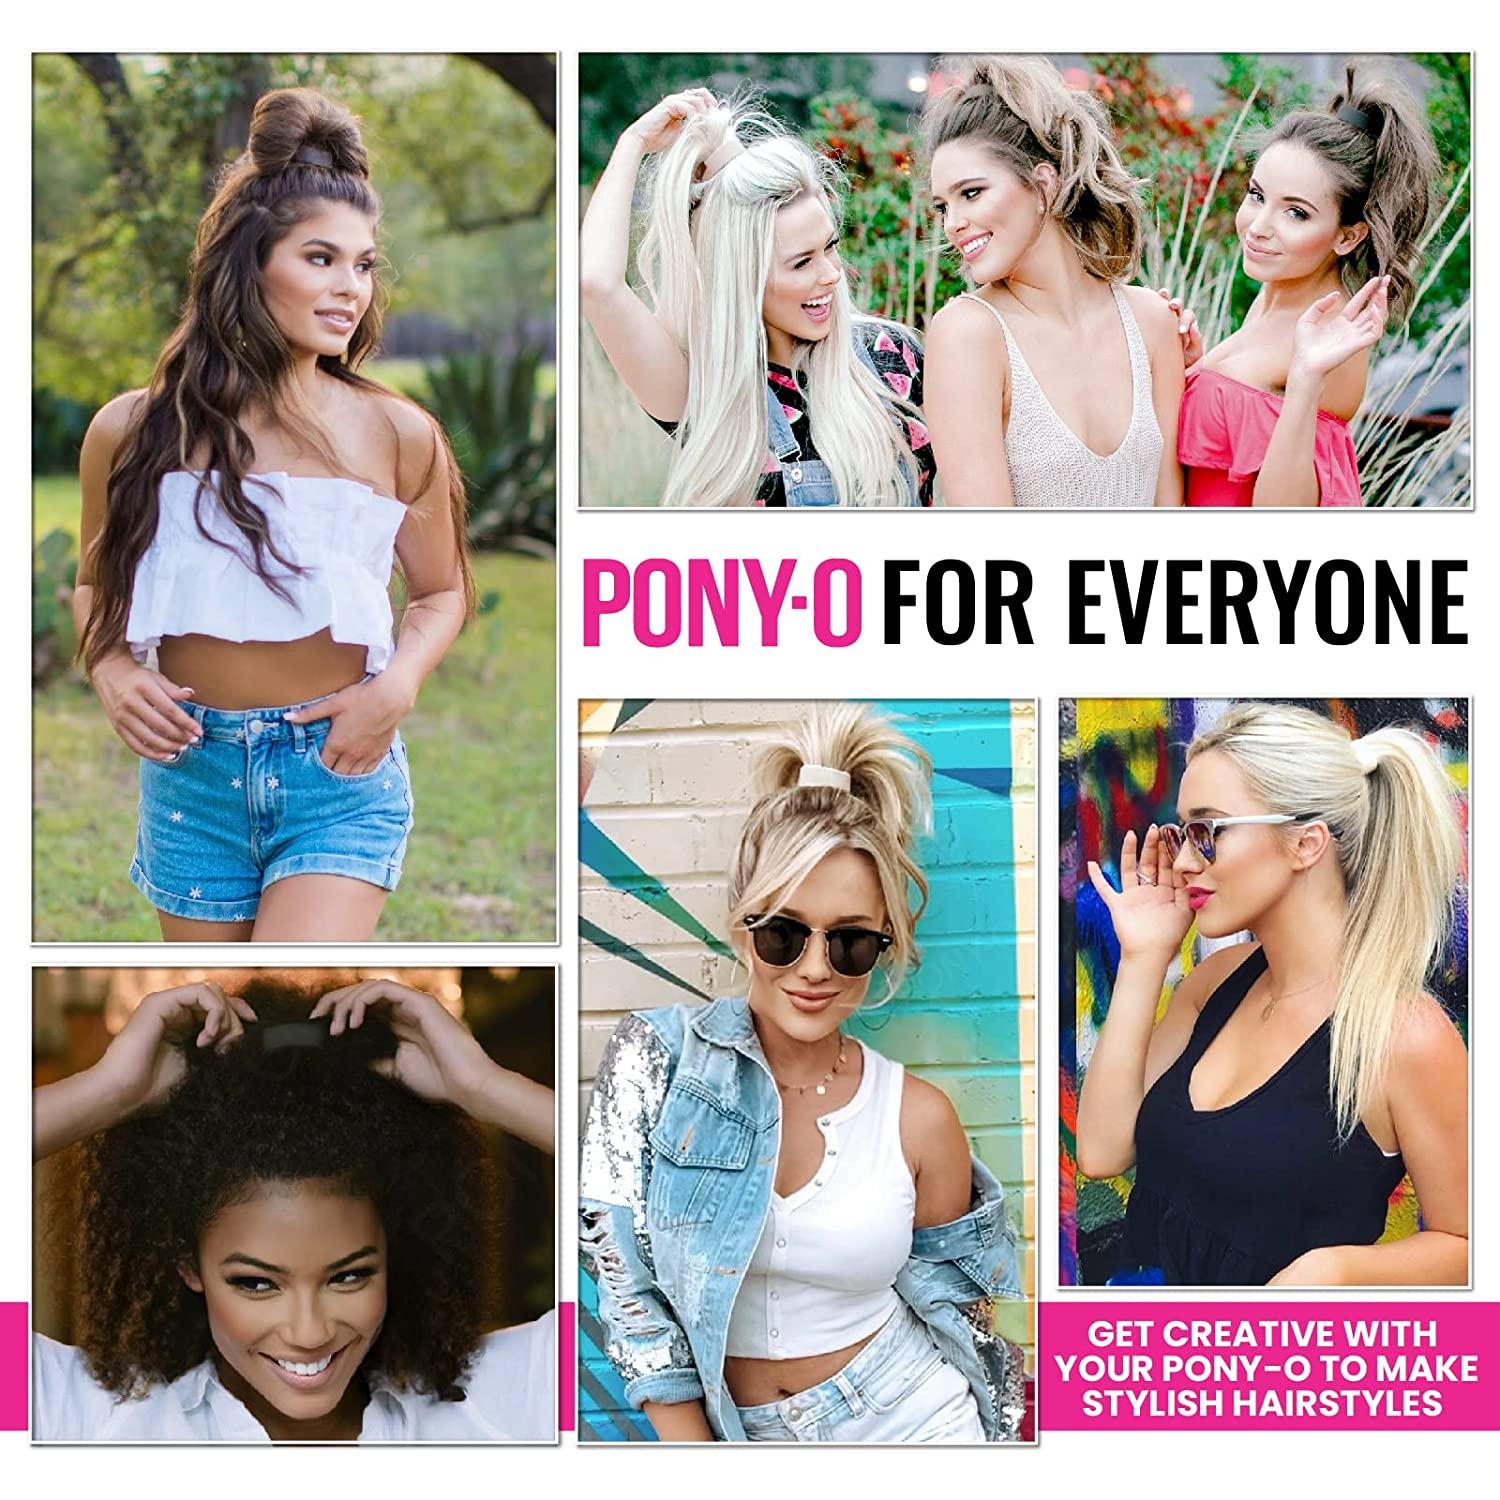 PONY-O Ponytail Holders: 5 Hair Accessories Your PONY-O Will